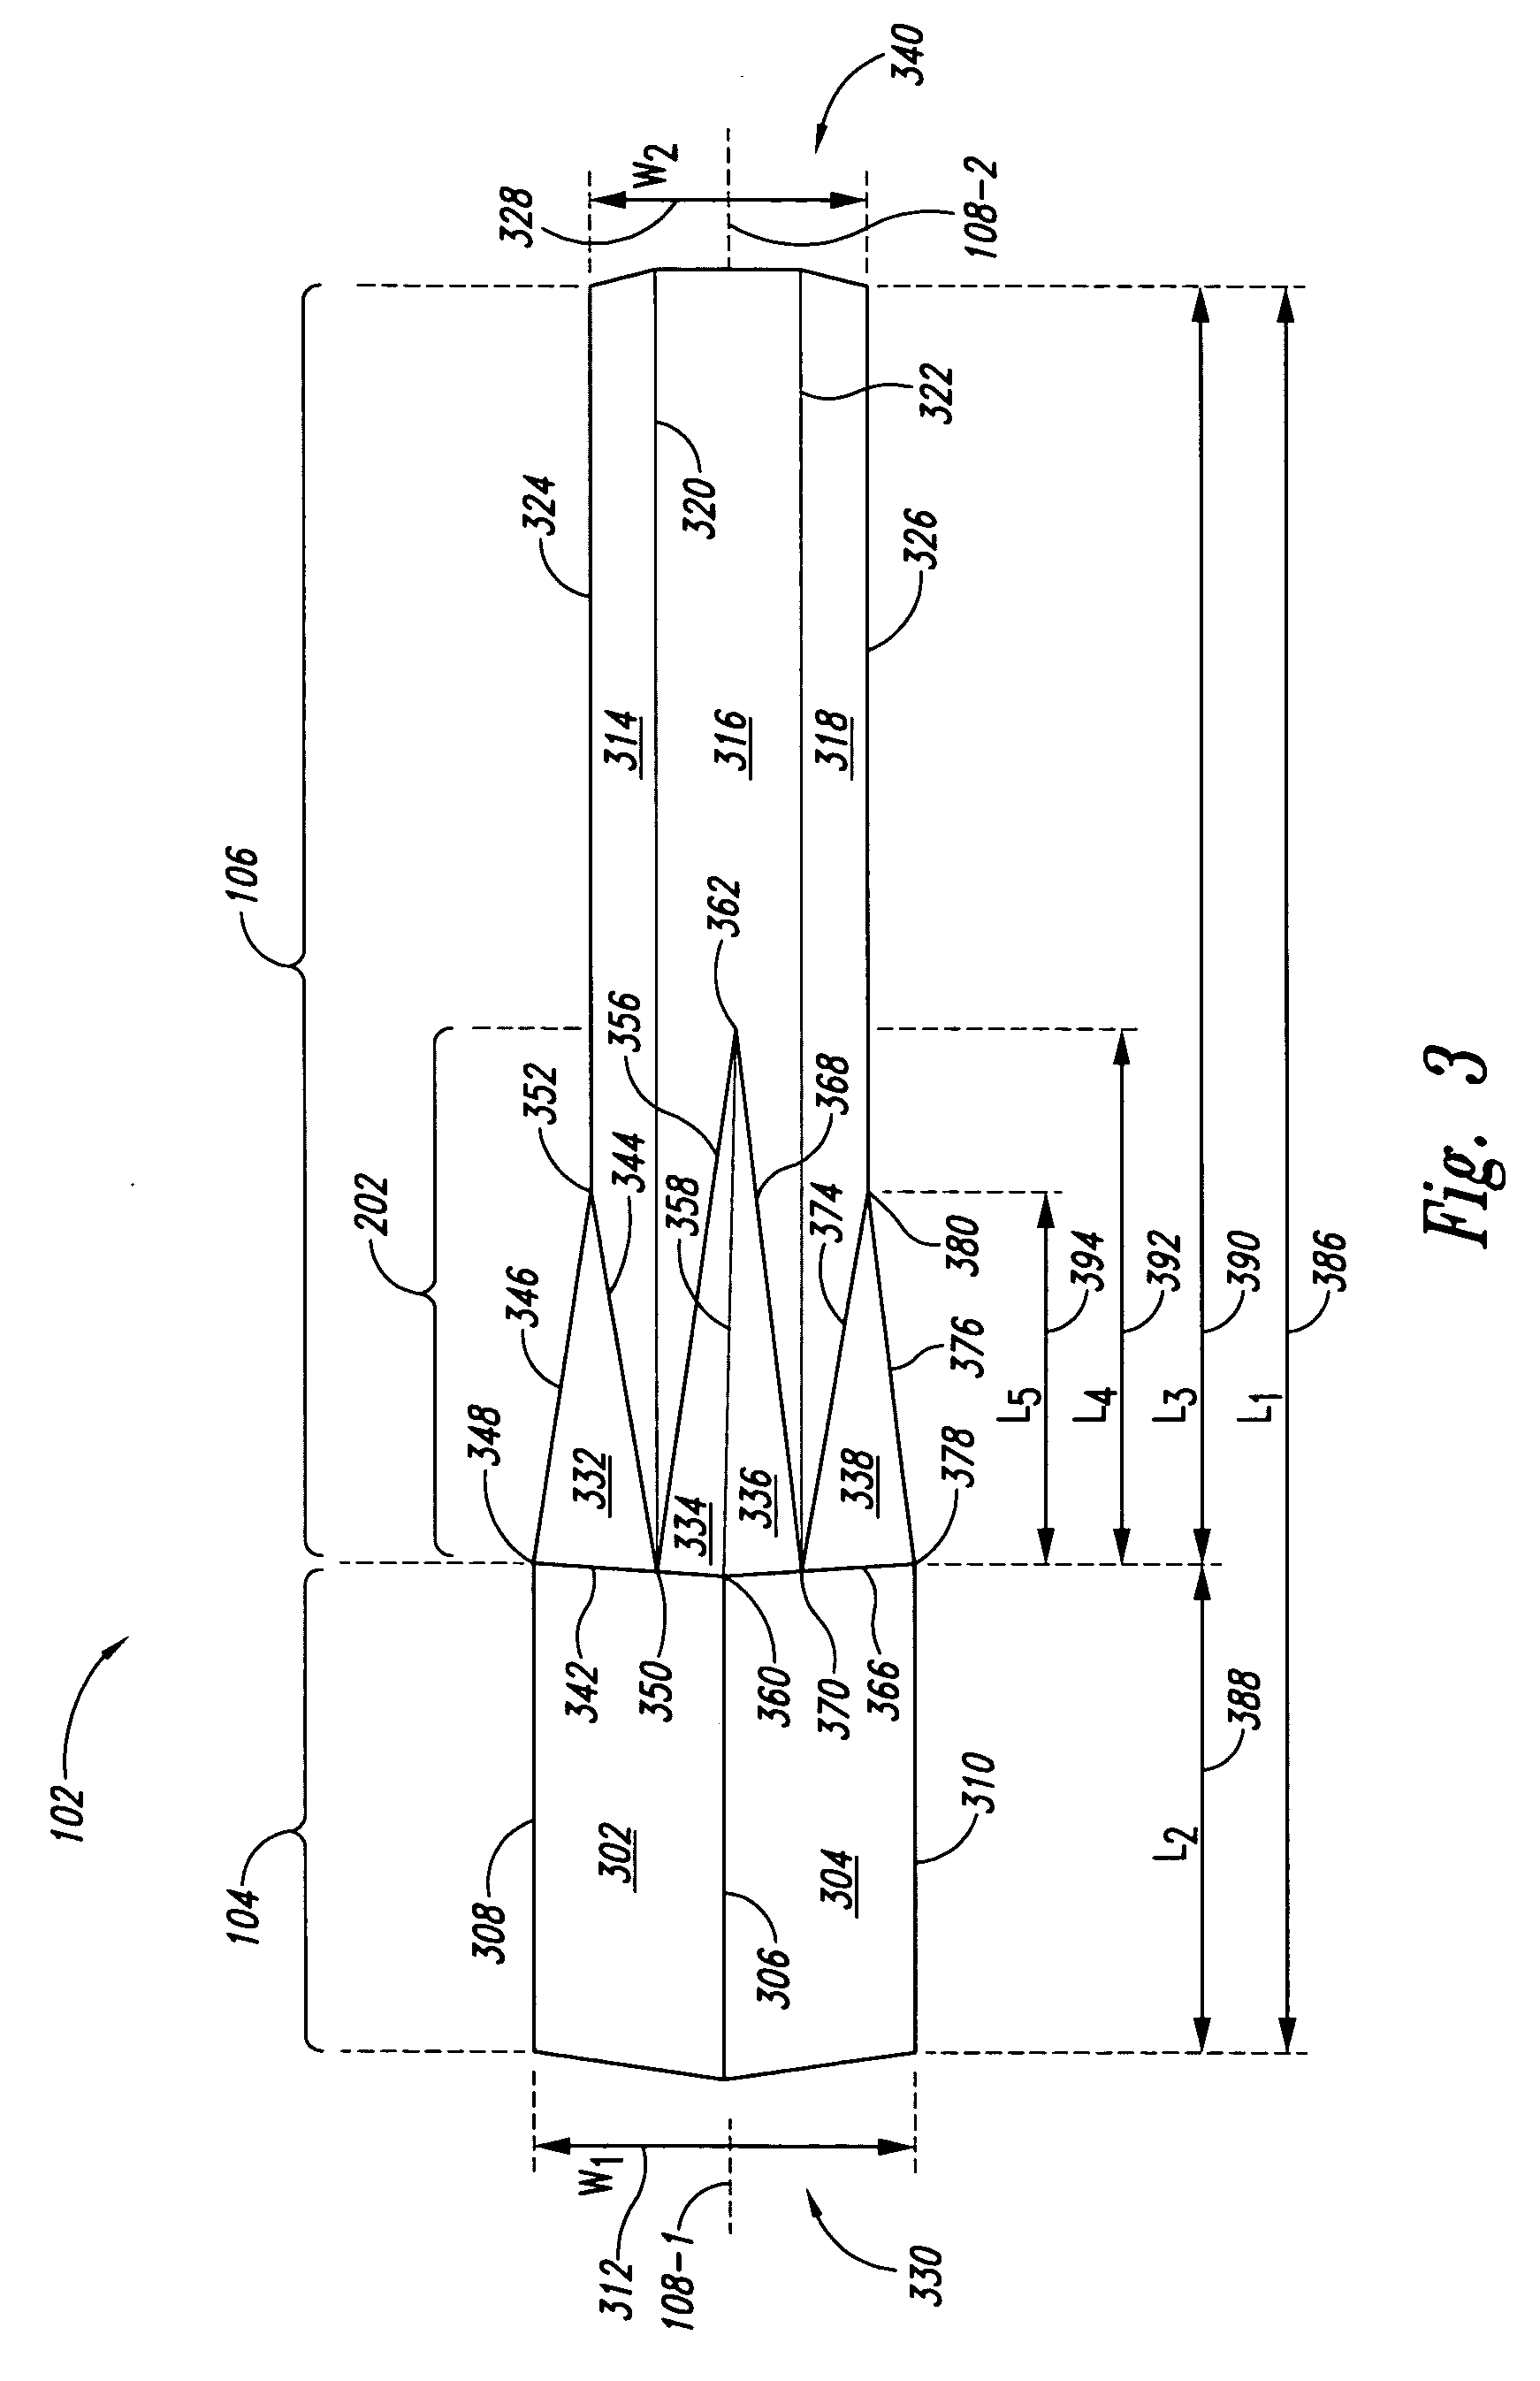 Light mixing and homogenizing apparatus and method